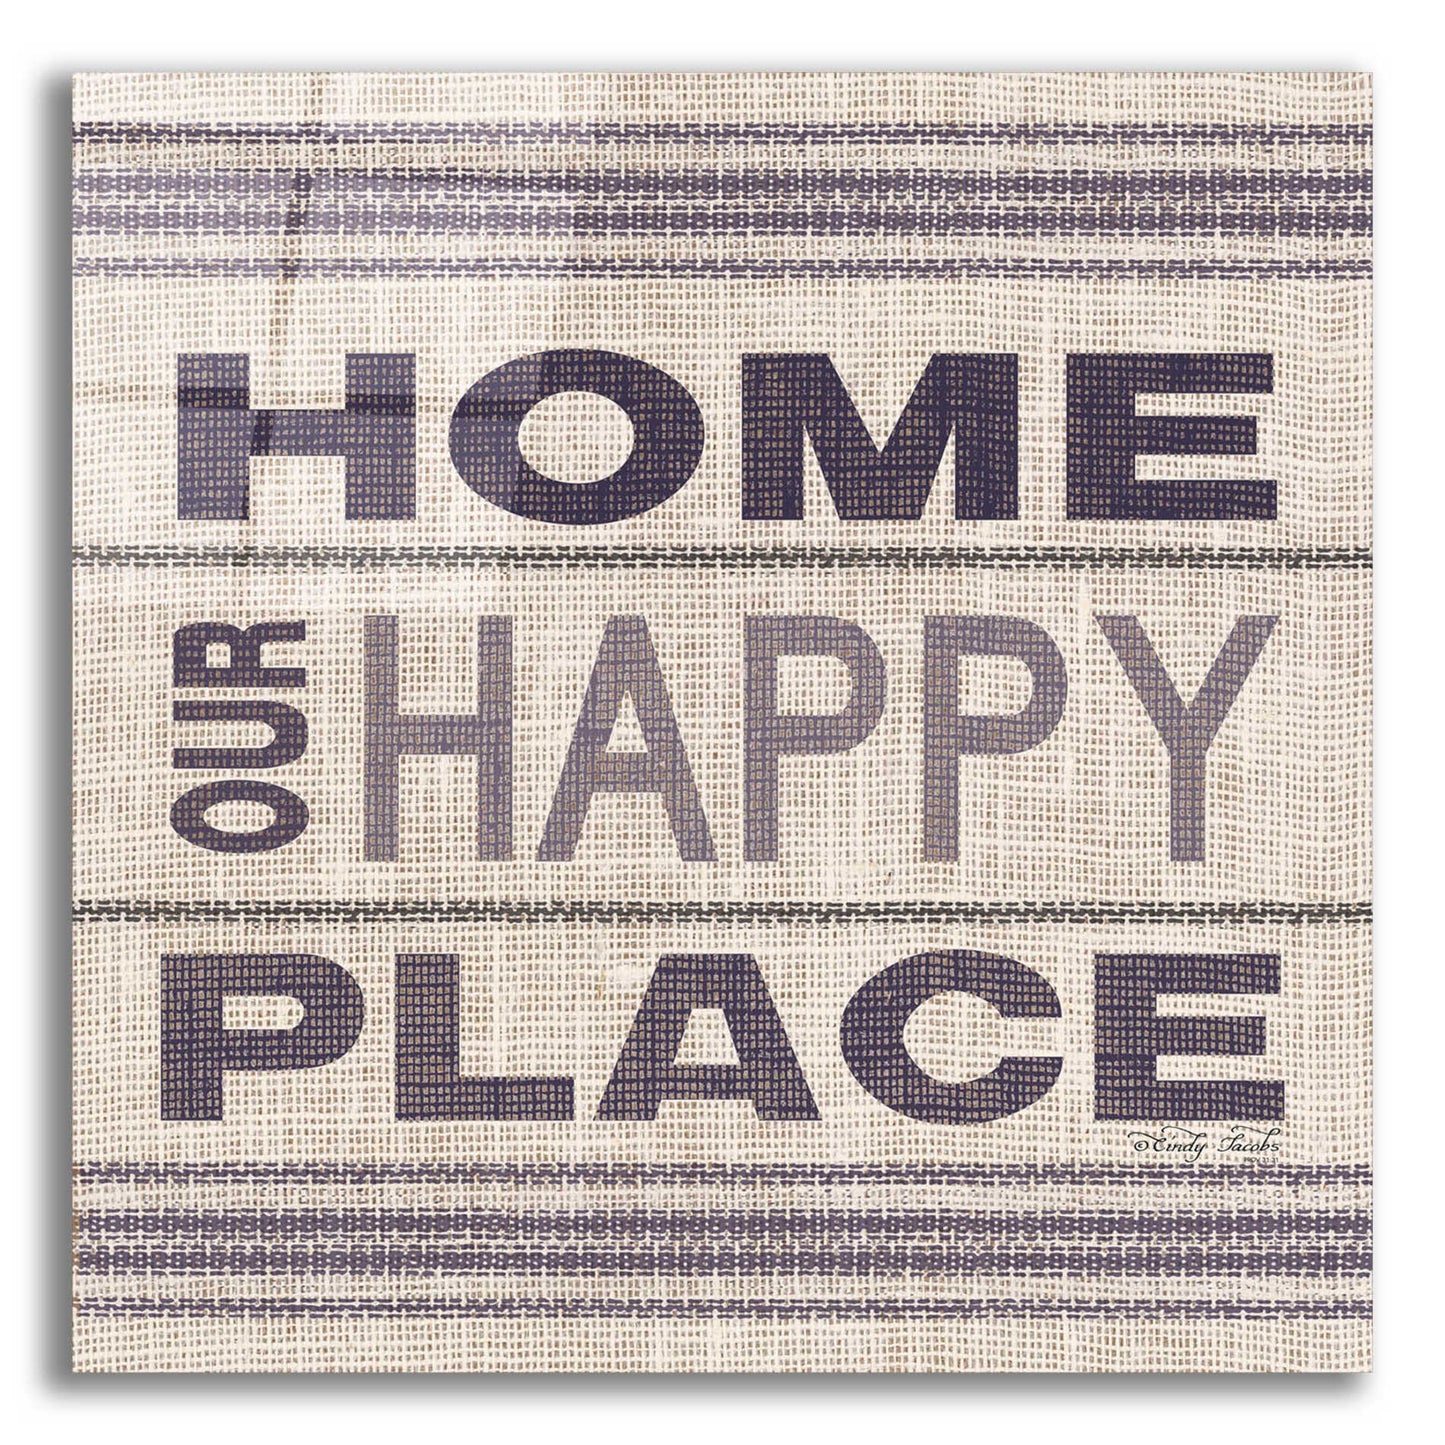 Epic Art 'Home - Our Happy Place' by Cindy Jacobs, Acrylic Glass Wall Art,12x12